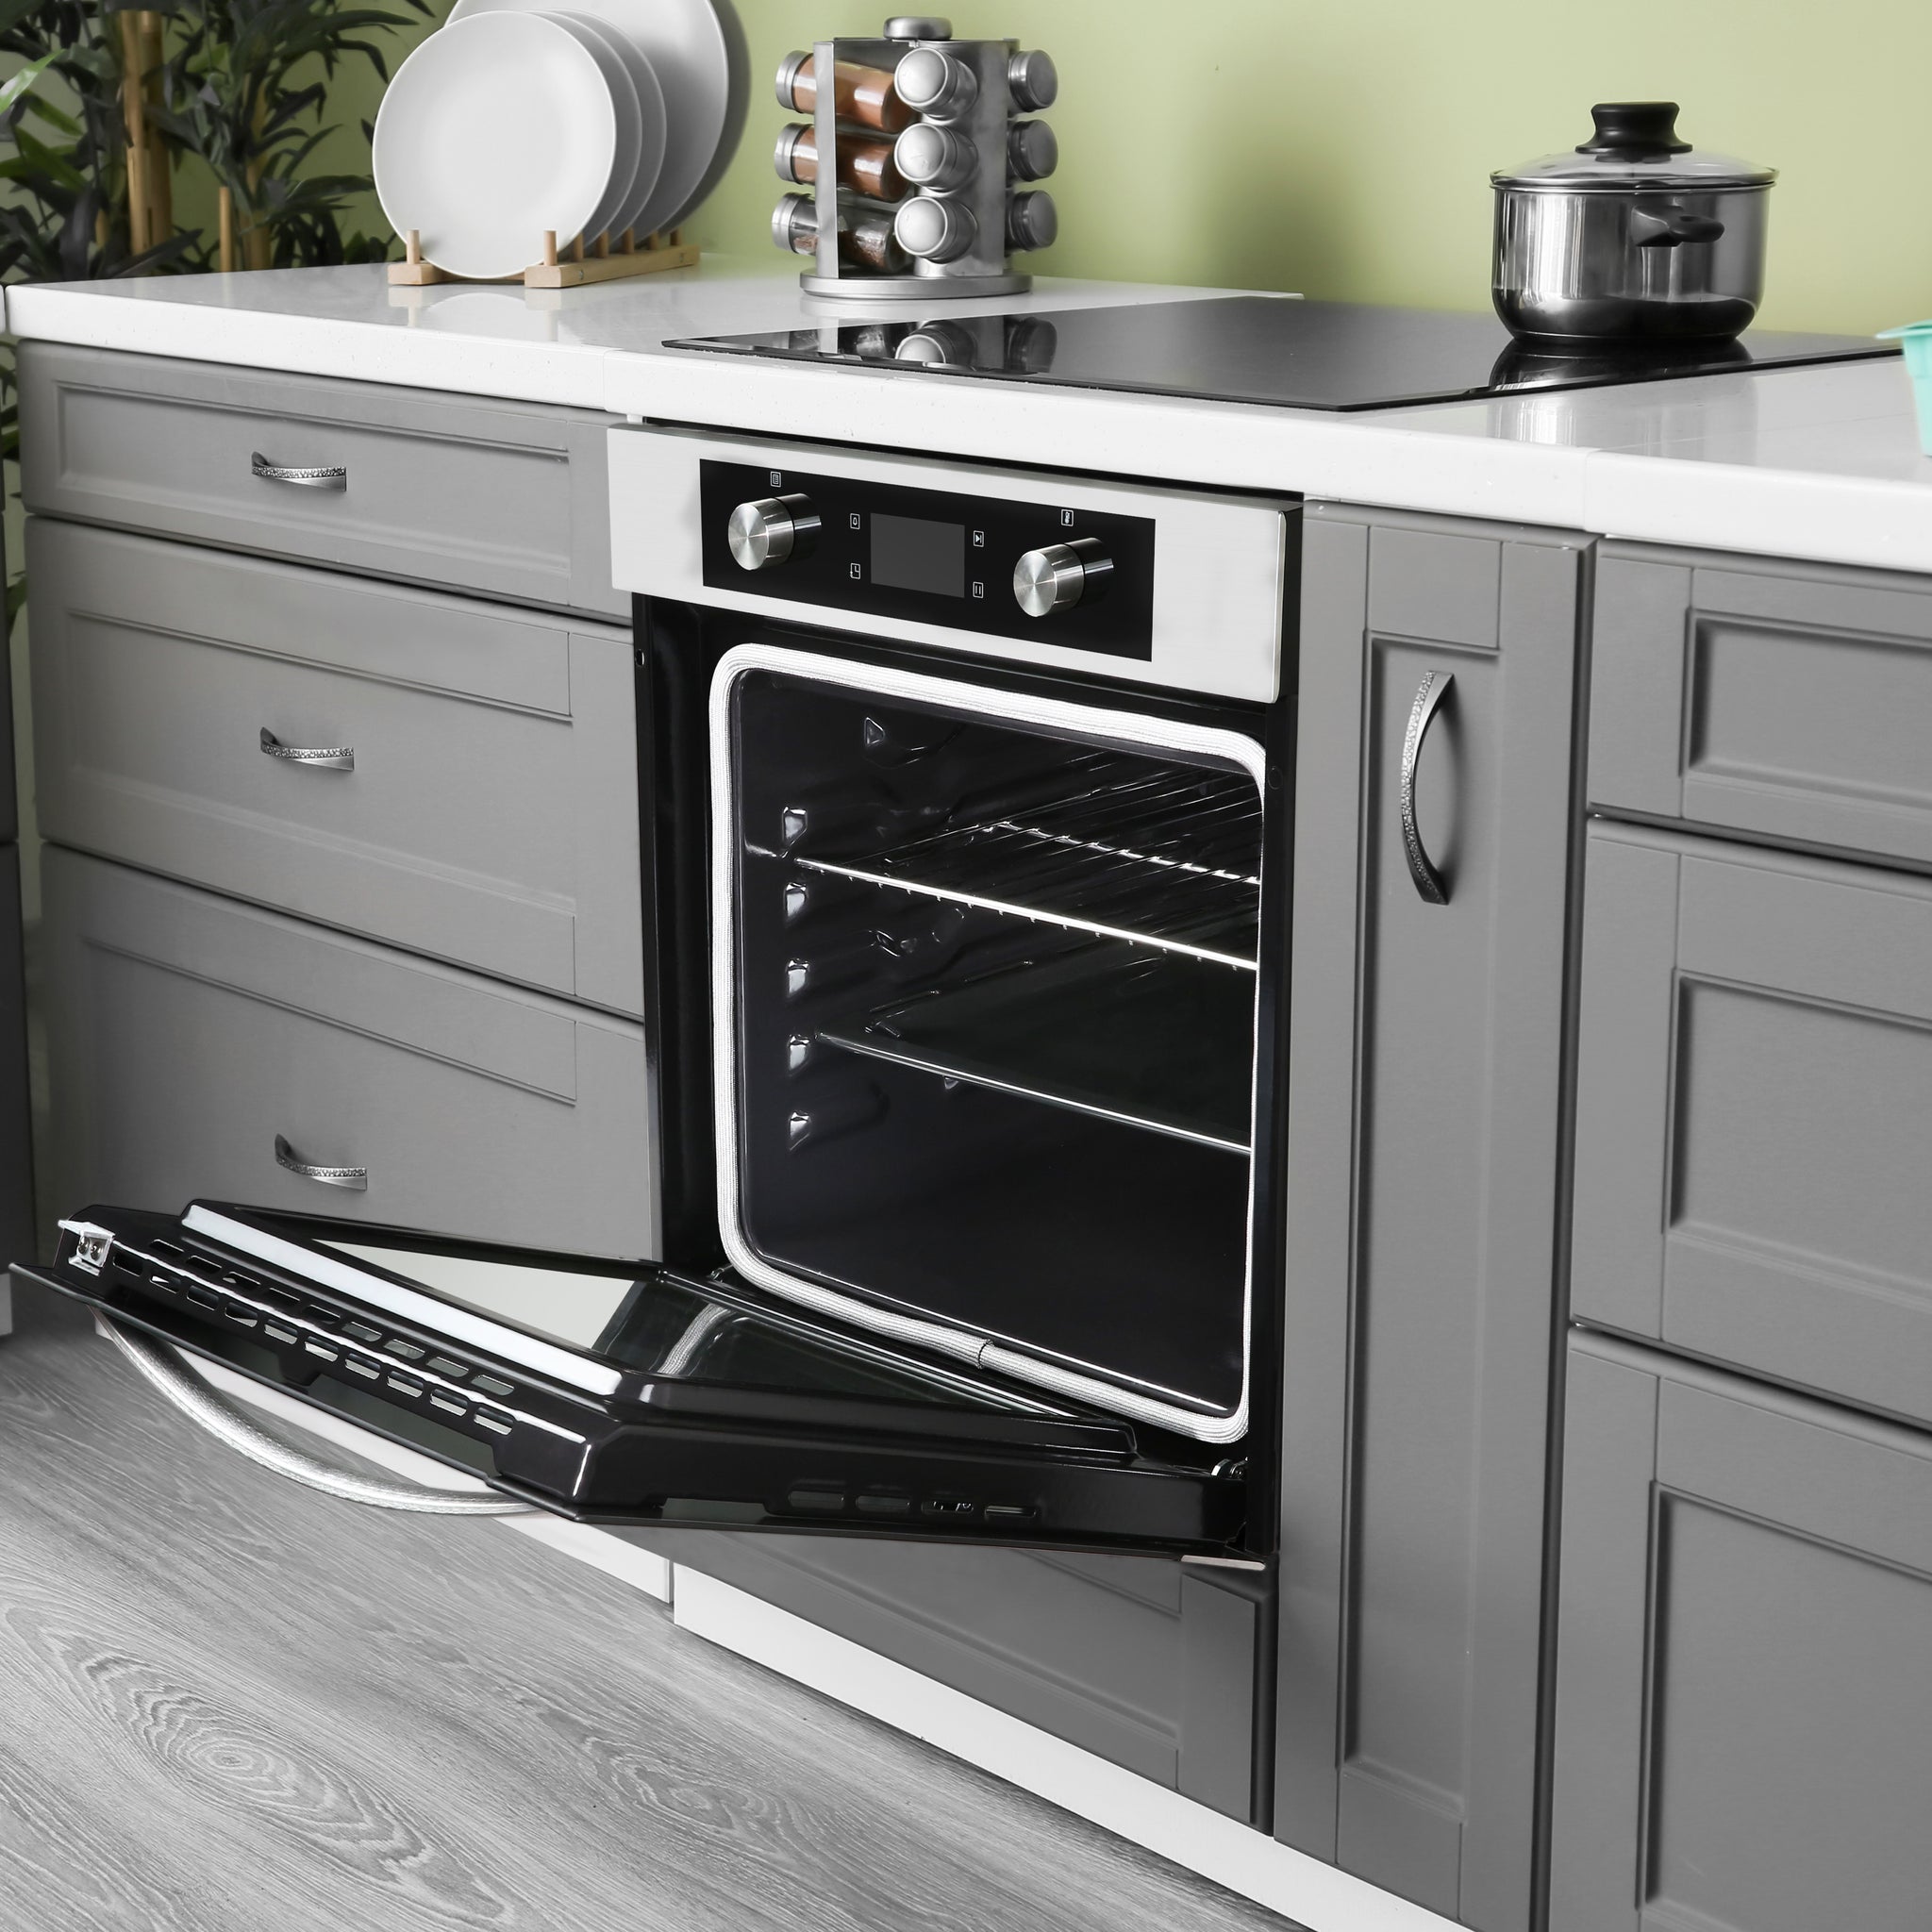 Self Cleaning Ovens 